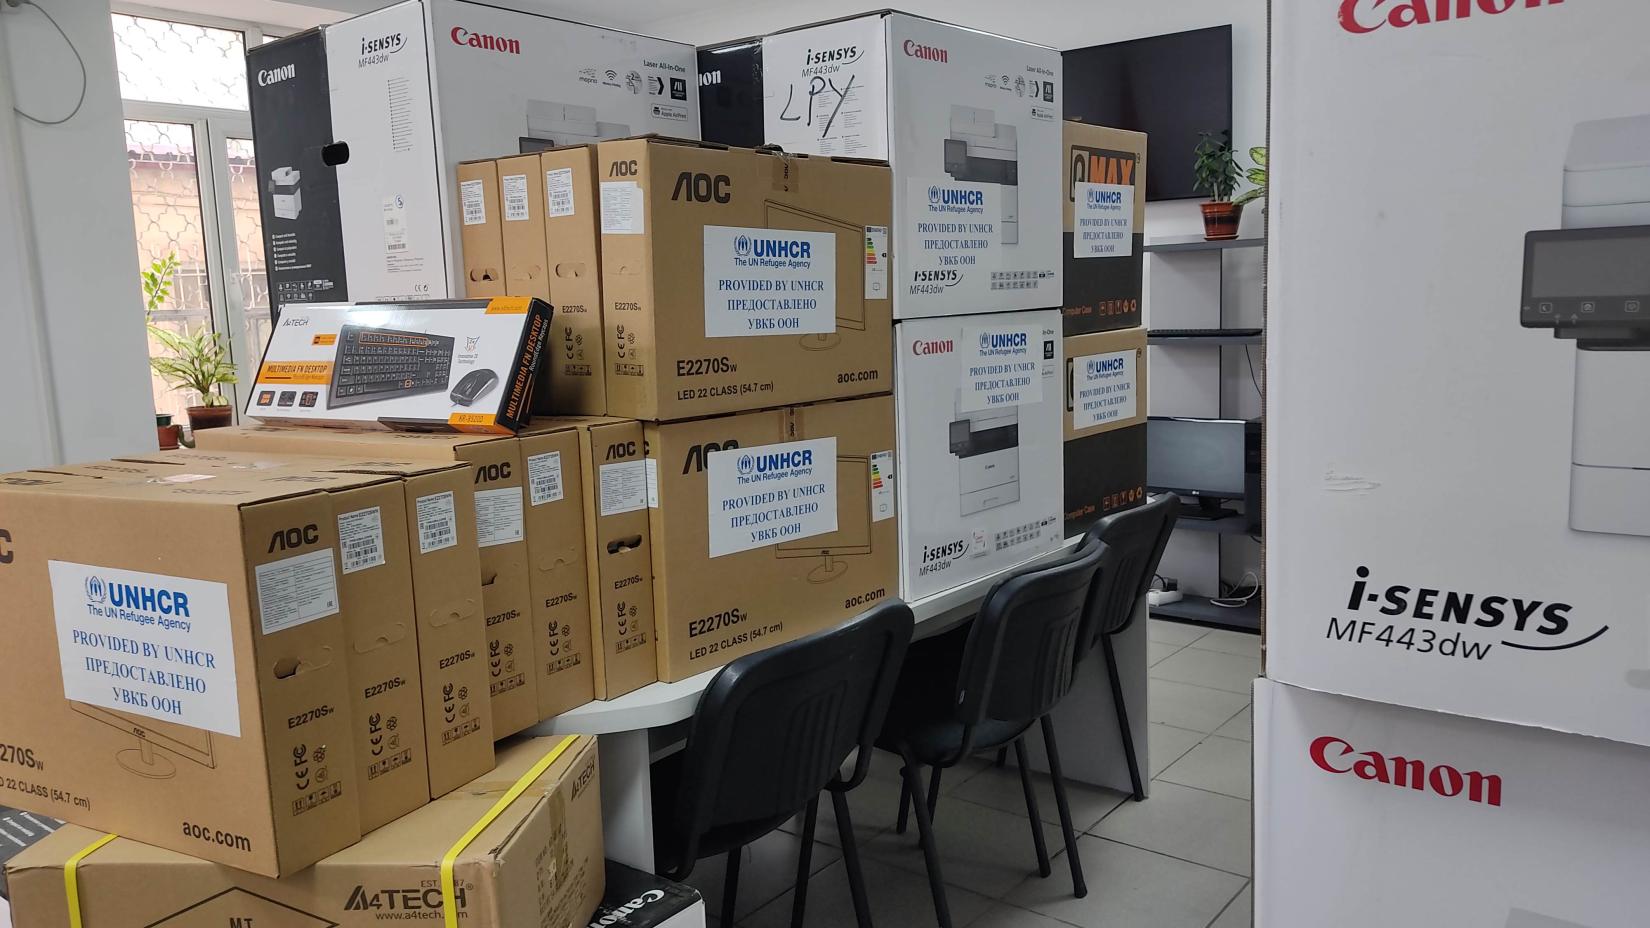 UNHCR handed over computer and office equipment in the amount of KGS 1,560,832 to the Migration Department of the Ministry of Labor, Social Security and Migration of the Kyrgyz Republic